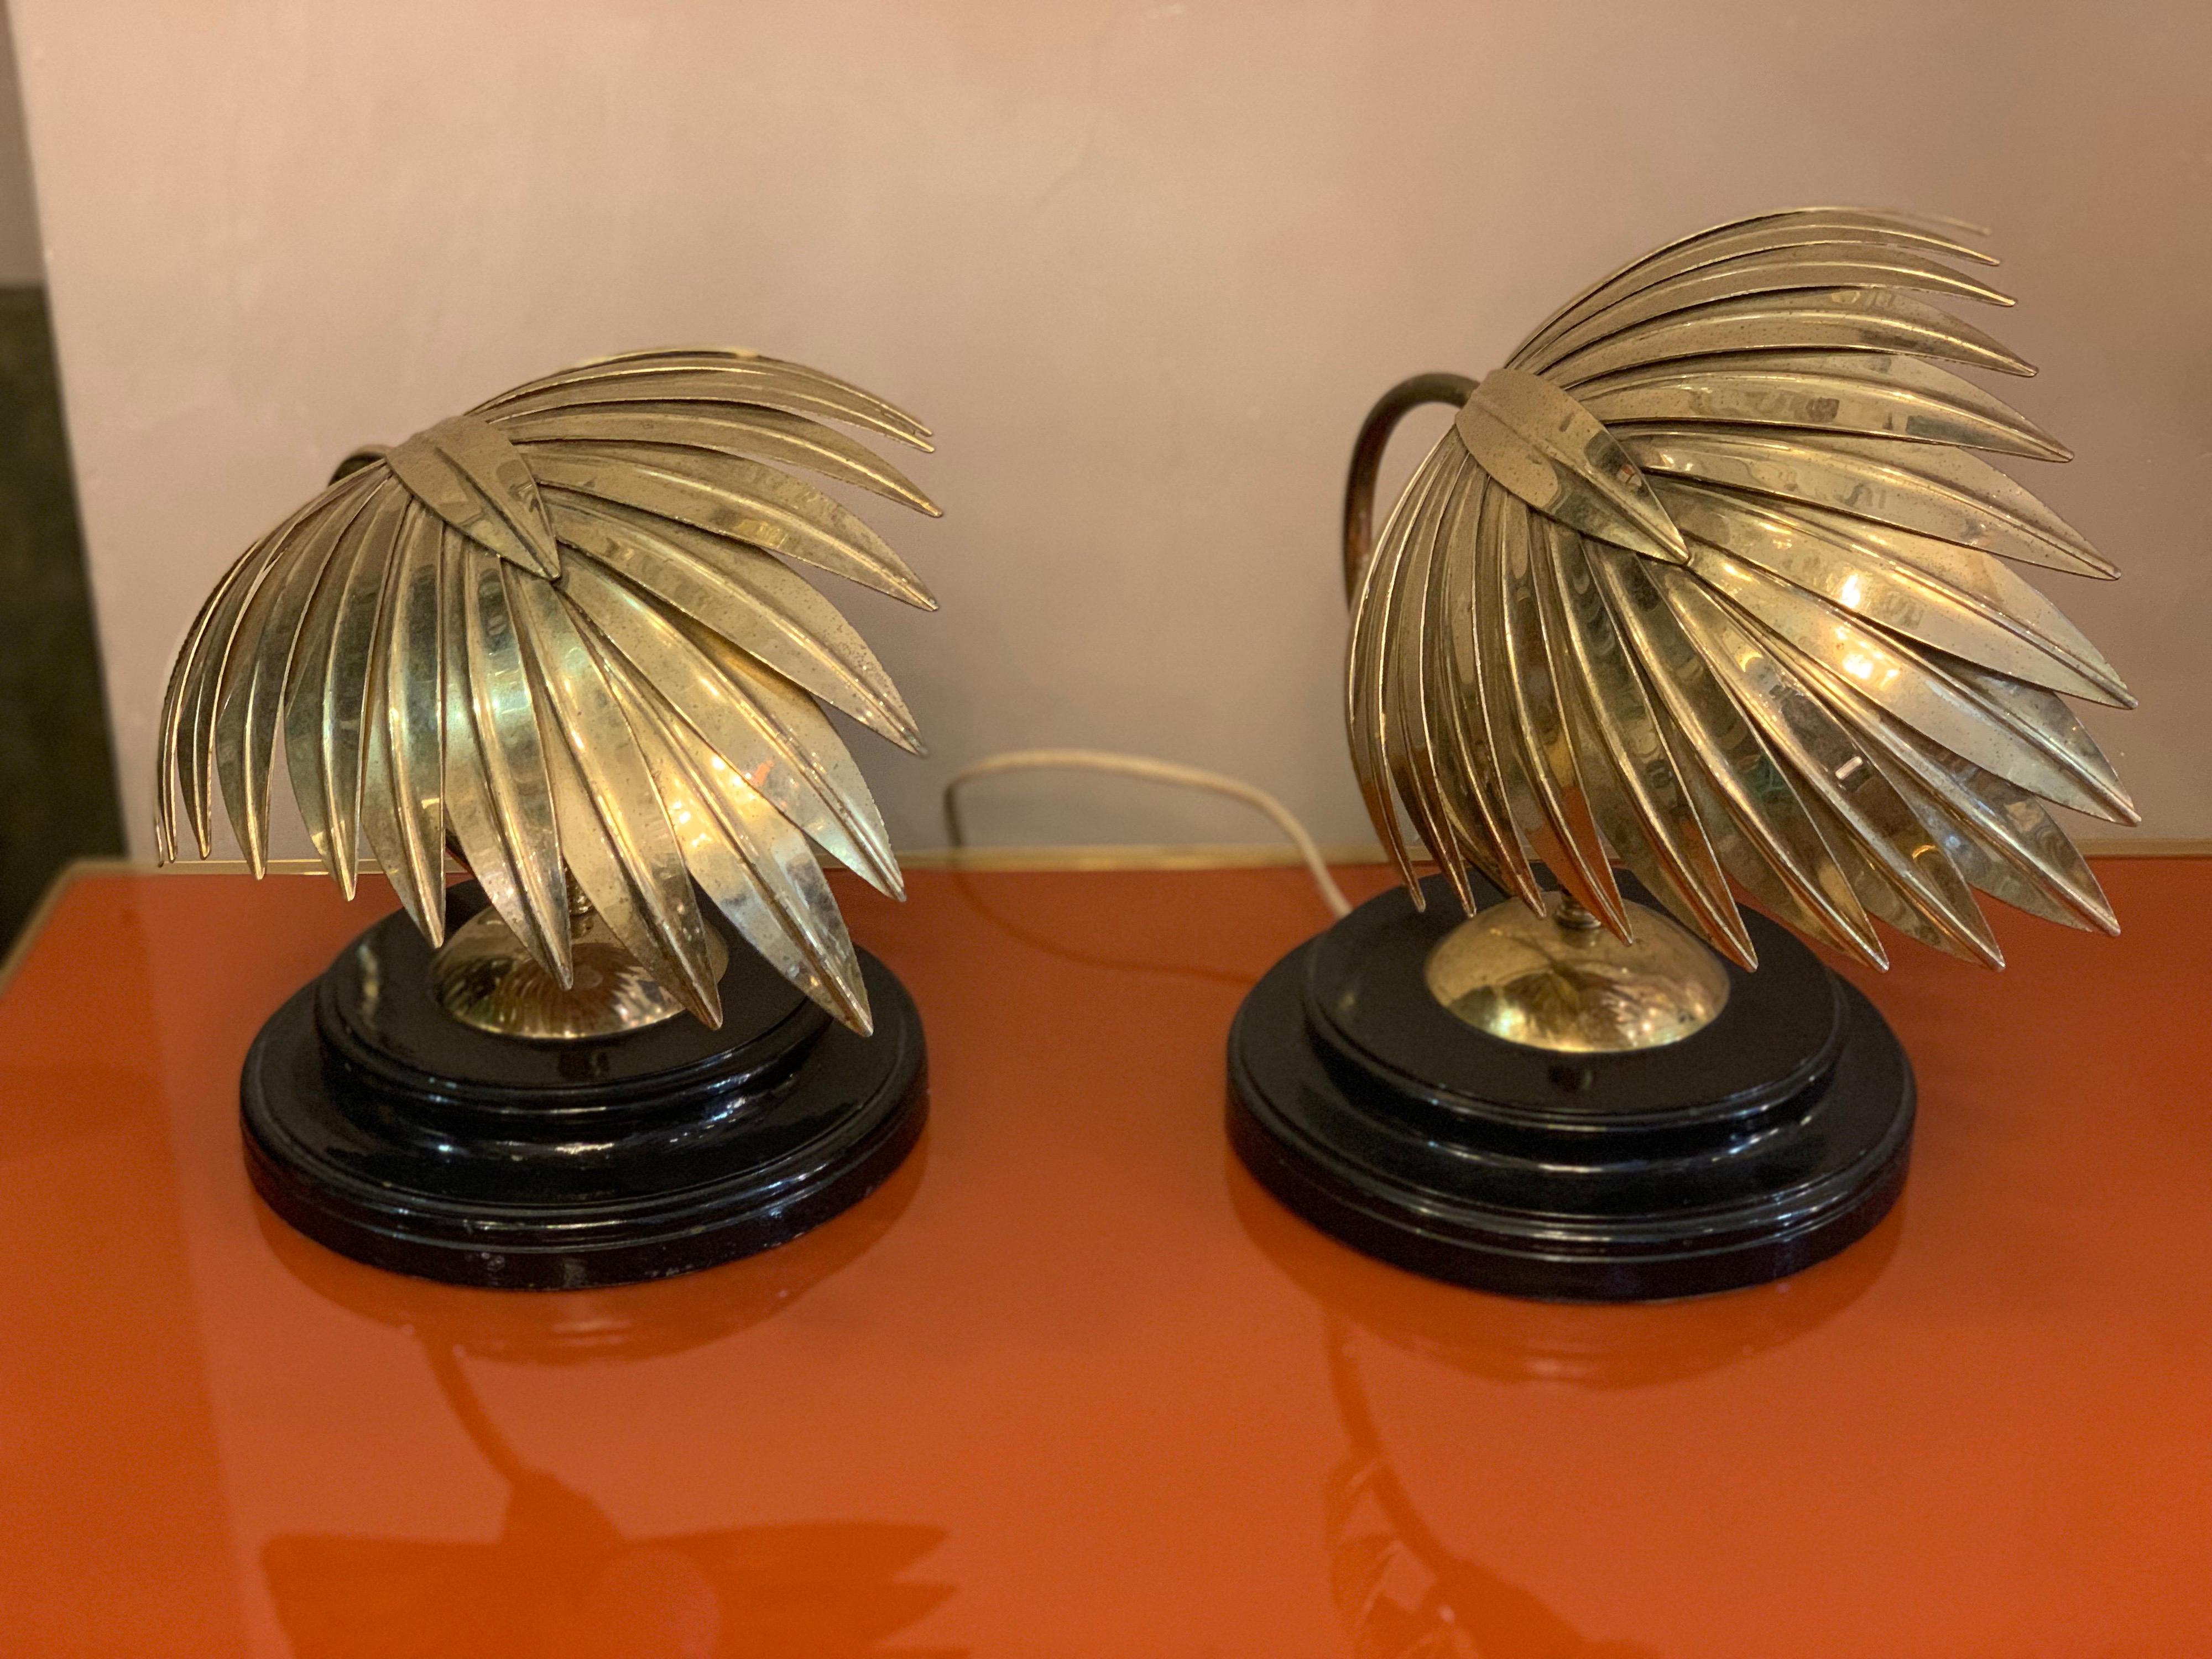 Pair of vintage brass leaf bedside lamps with round black lacquered base.
One bulb per lamp. 
Good vintage condition with small imperfections consistent with age which increase its flavor.